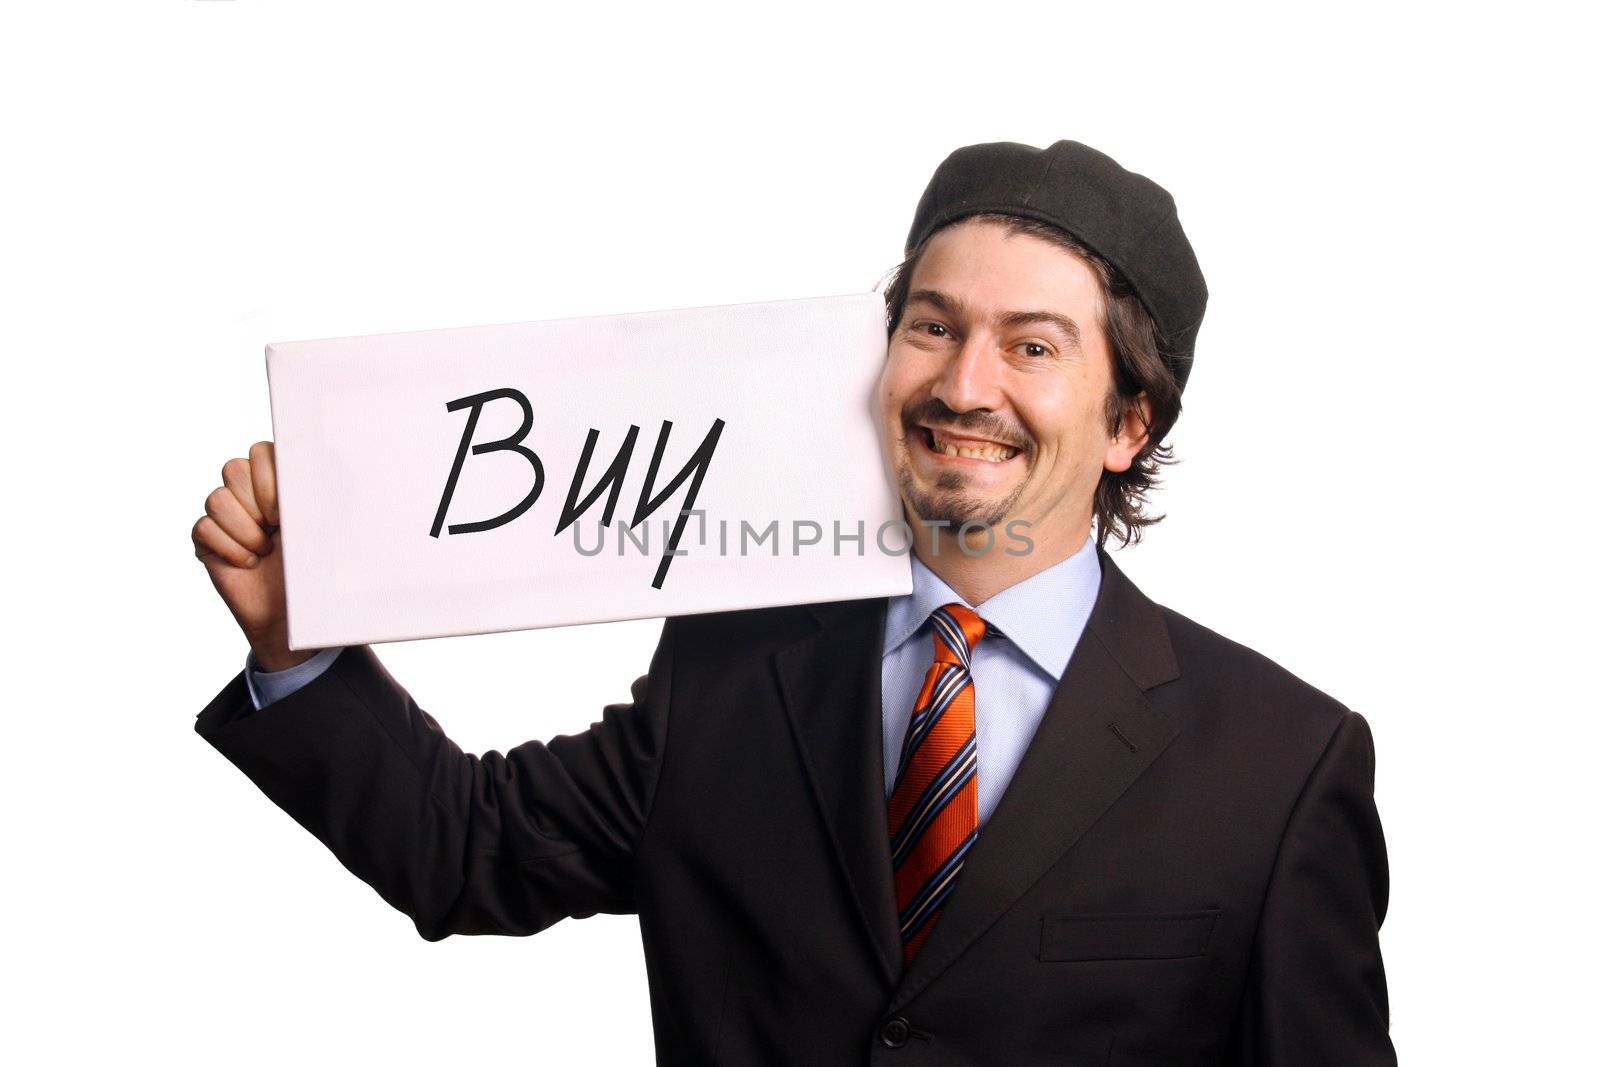 business man with chart over white background